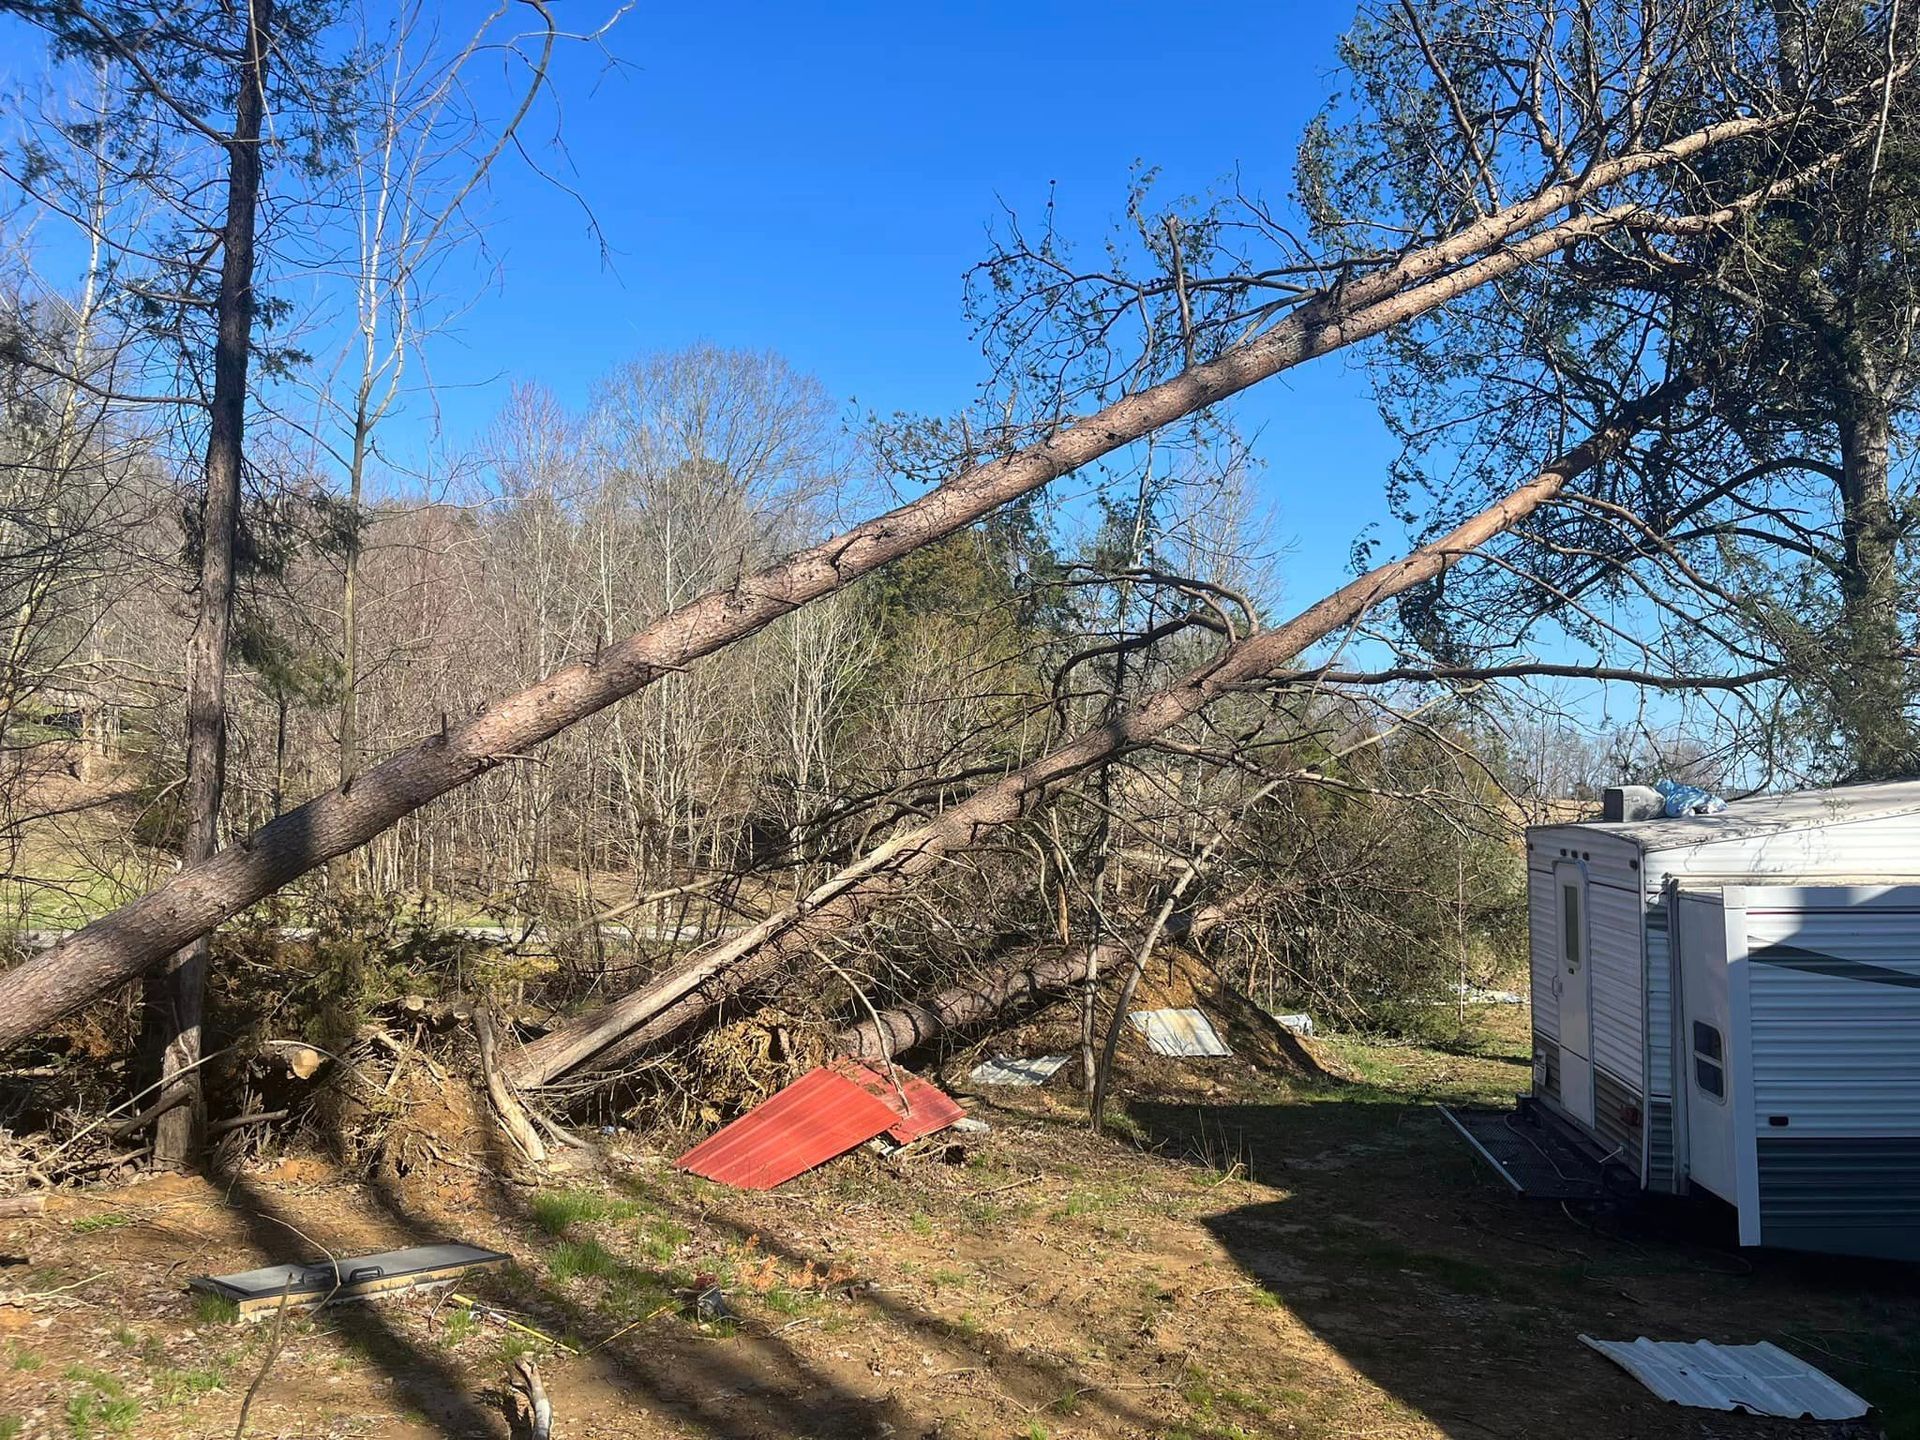 a fallen tree in a yard next to a trailer .